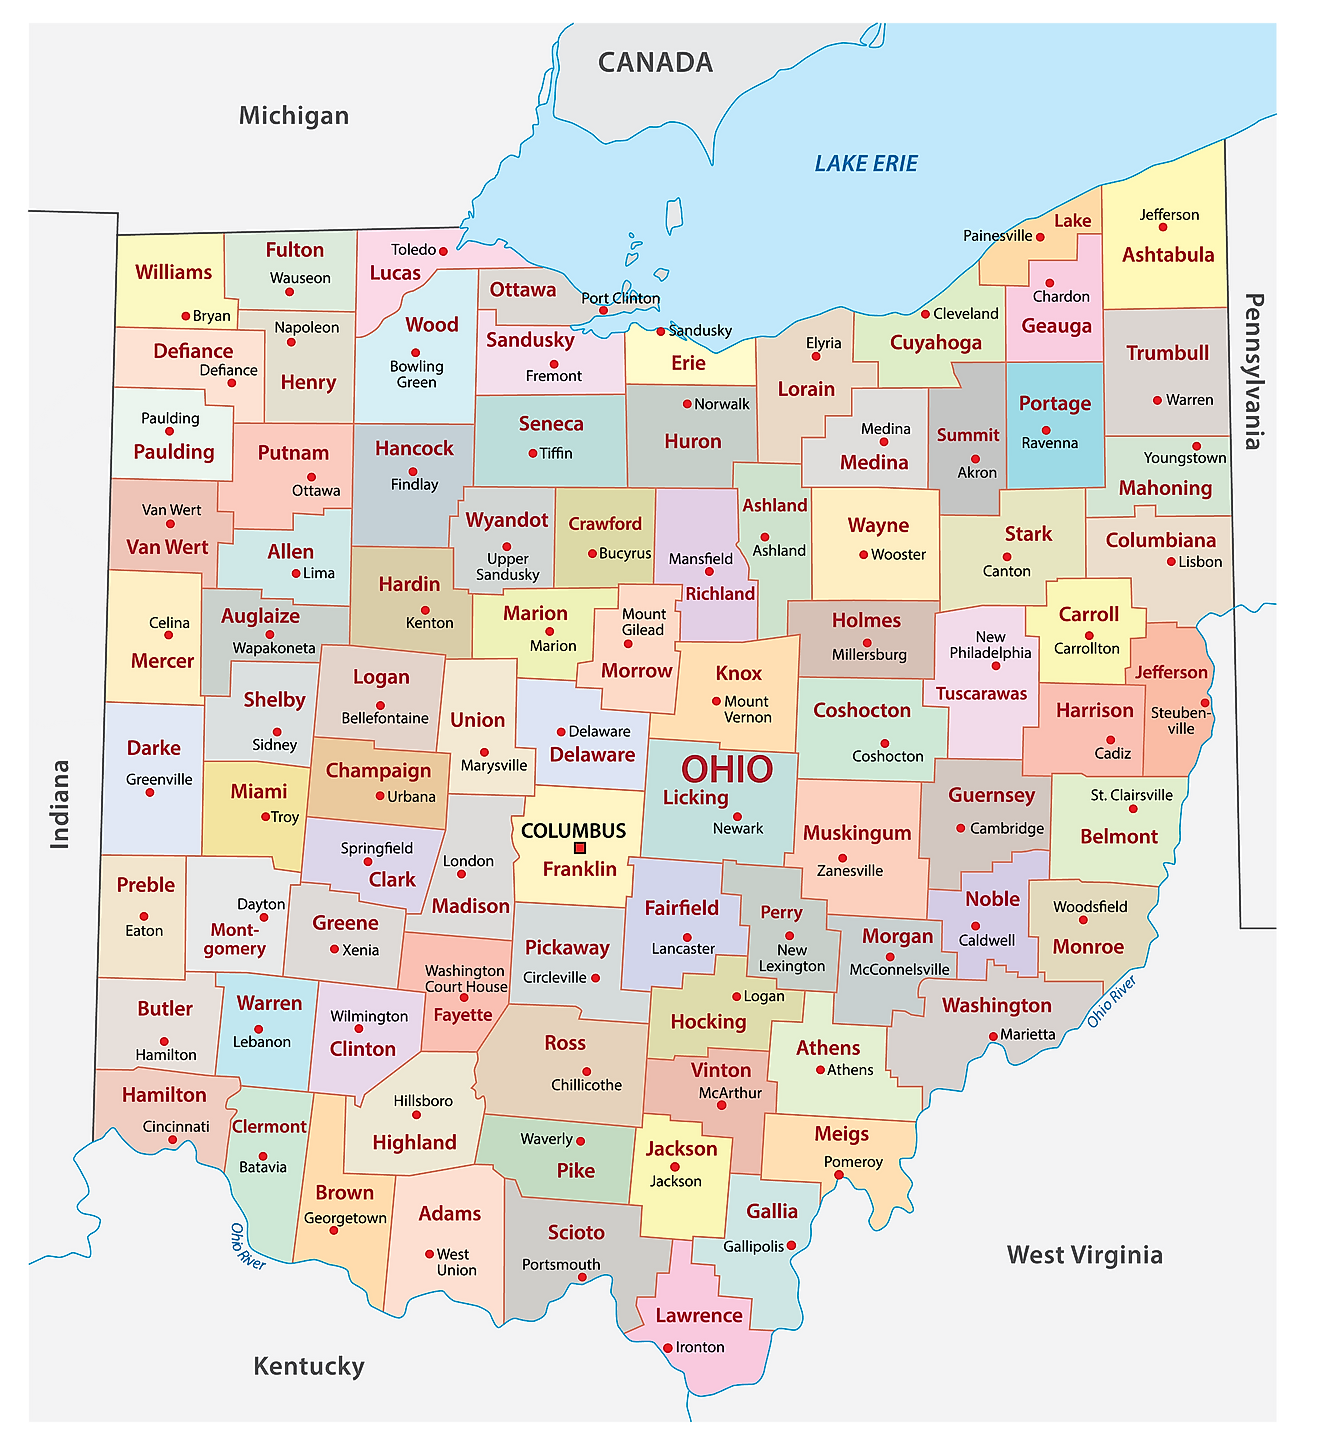 Administrative Map of Ohio showing its 89 counties and the capital city - Columbus